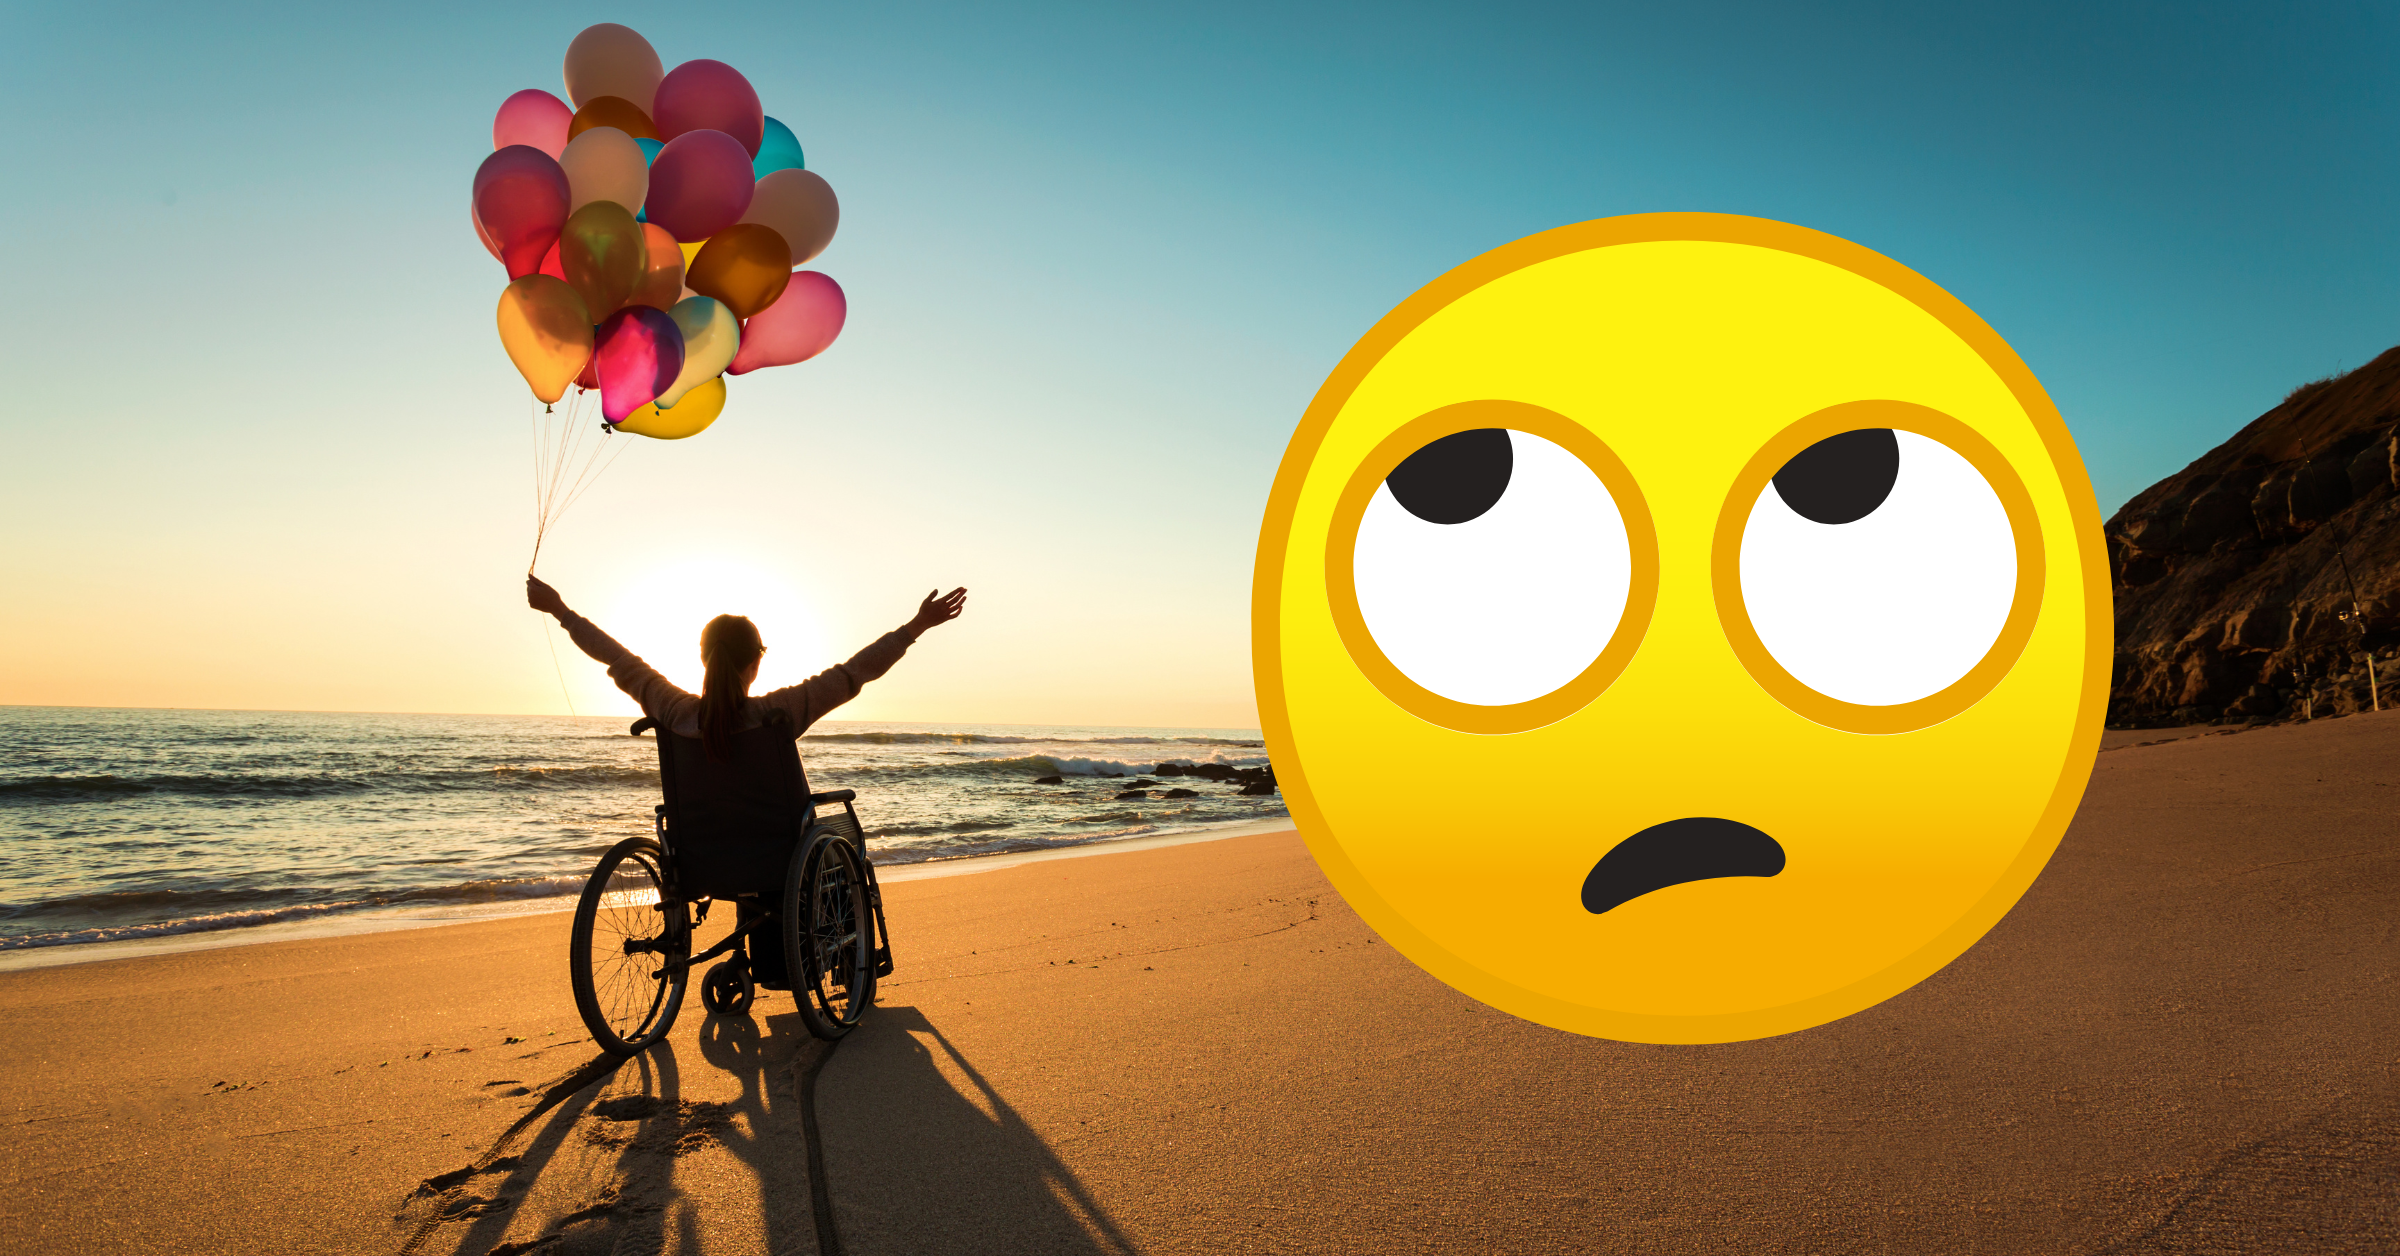 A photograph shows a woman in a wheelchair lifting their hands in the air while holding a collection of colourful balloons. The woman is on a beach at sunset facing the ocean. To the right of her is an emoji symbol of a round and yellow face rolling its eyes.